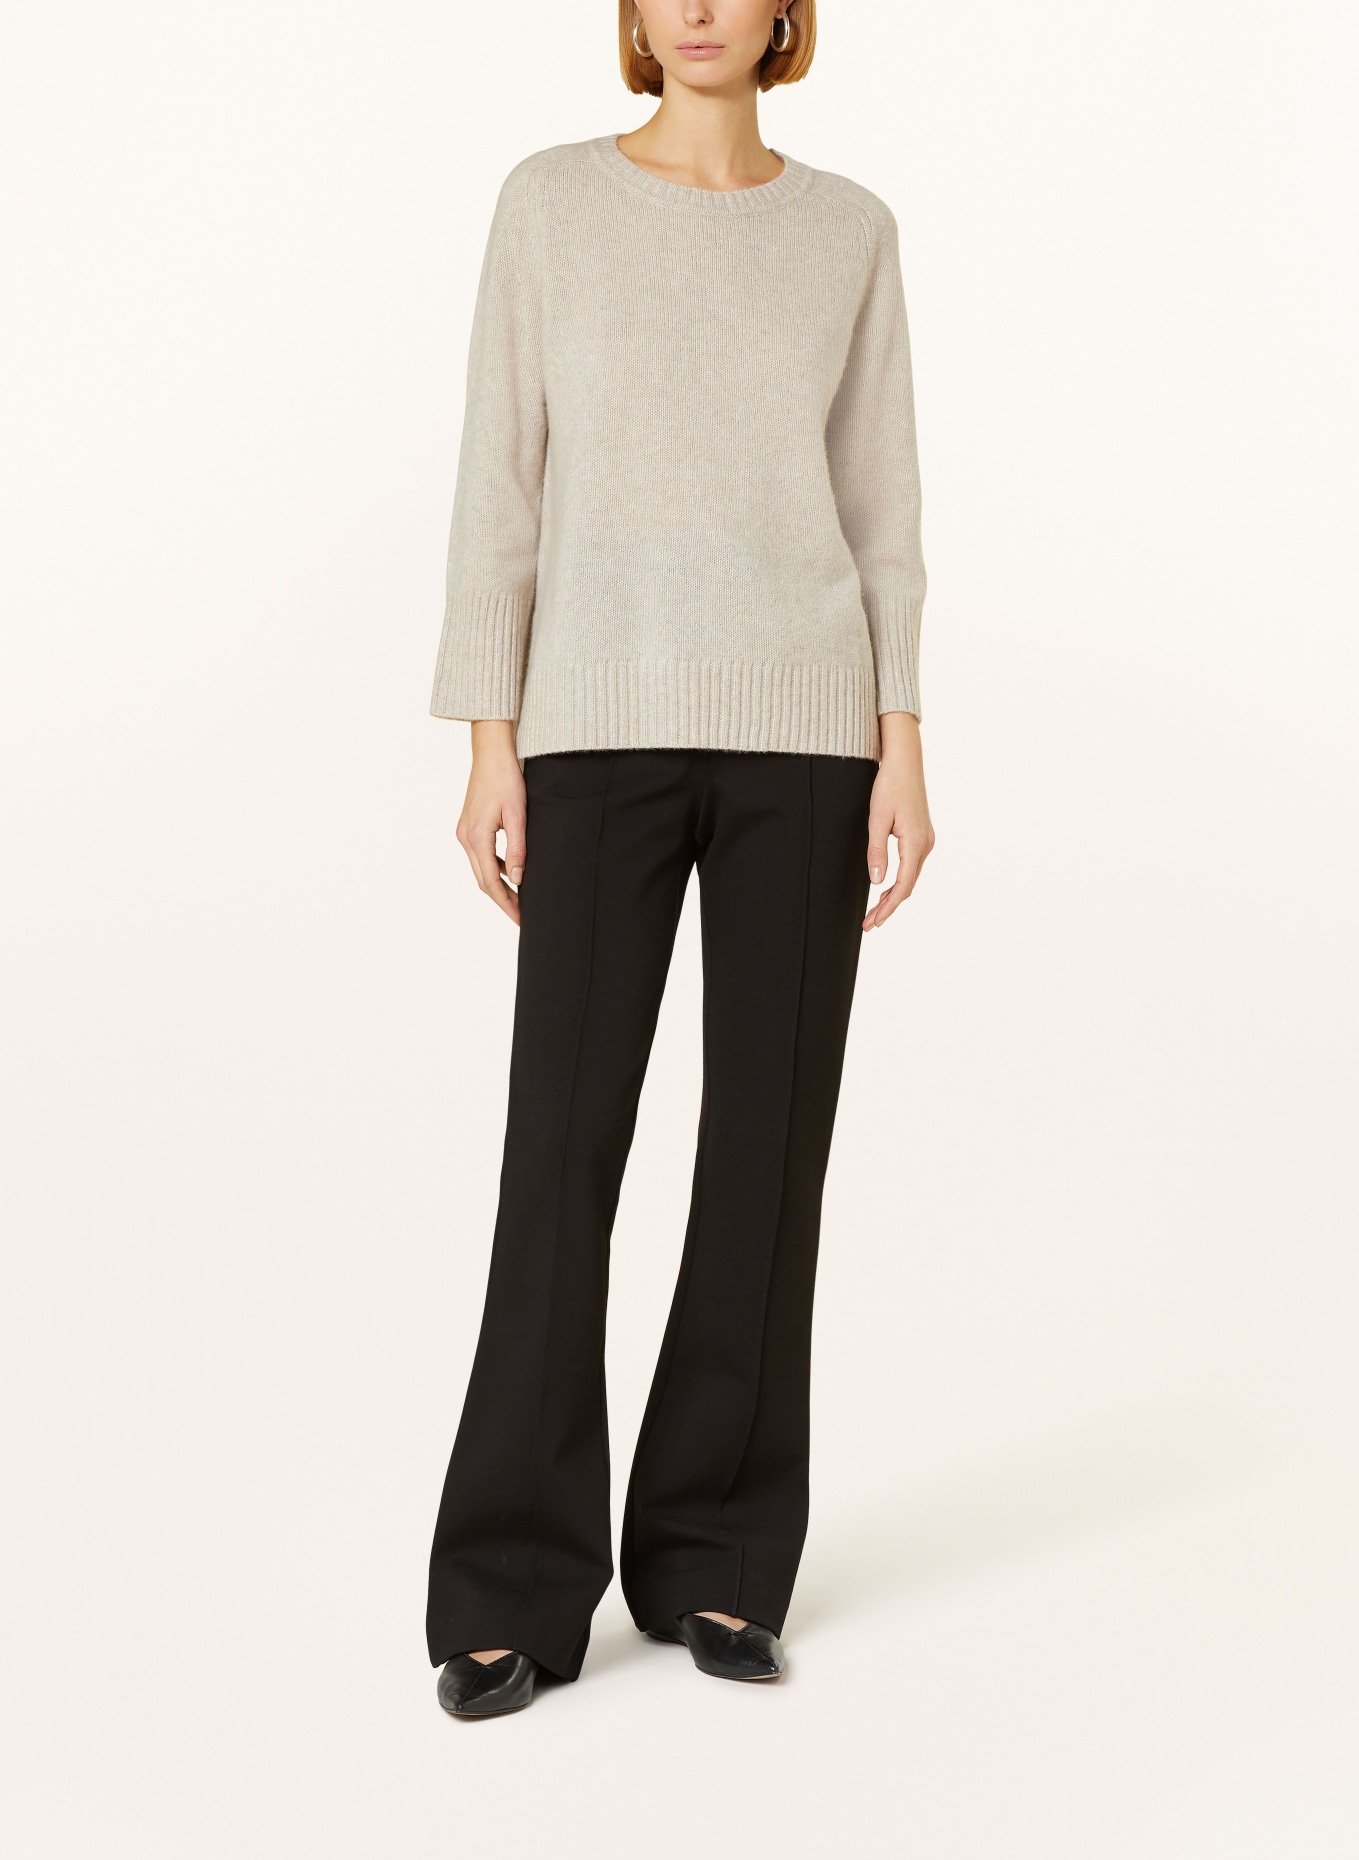 HEMISPHERE Sweater with cashmere, Color: BEIGE (Image 2)